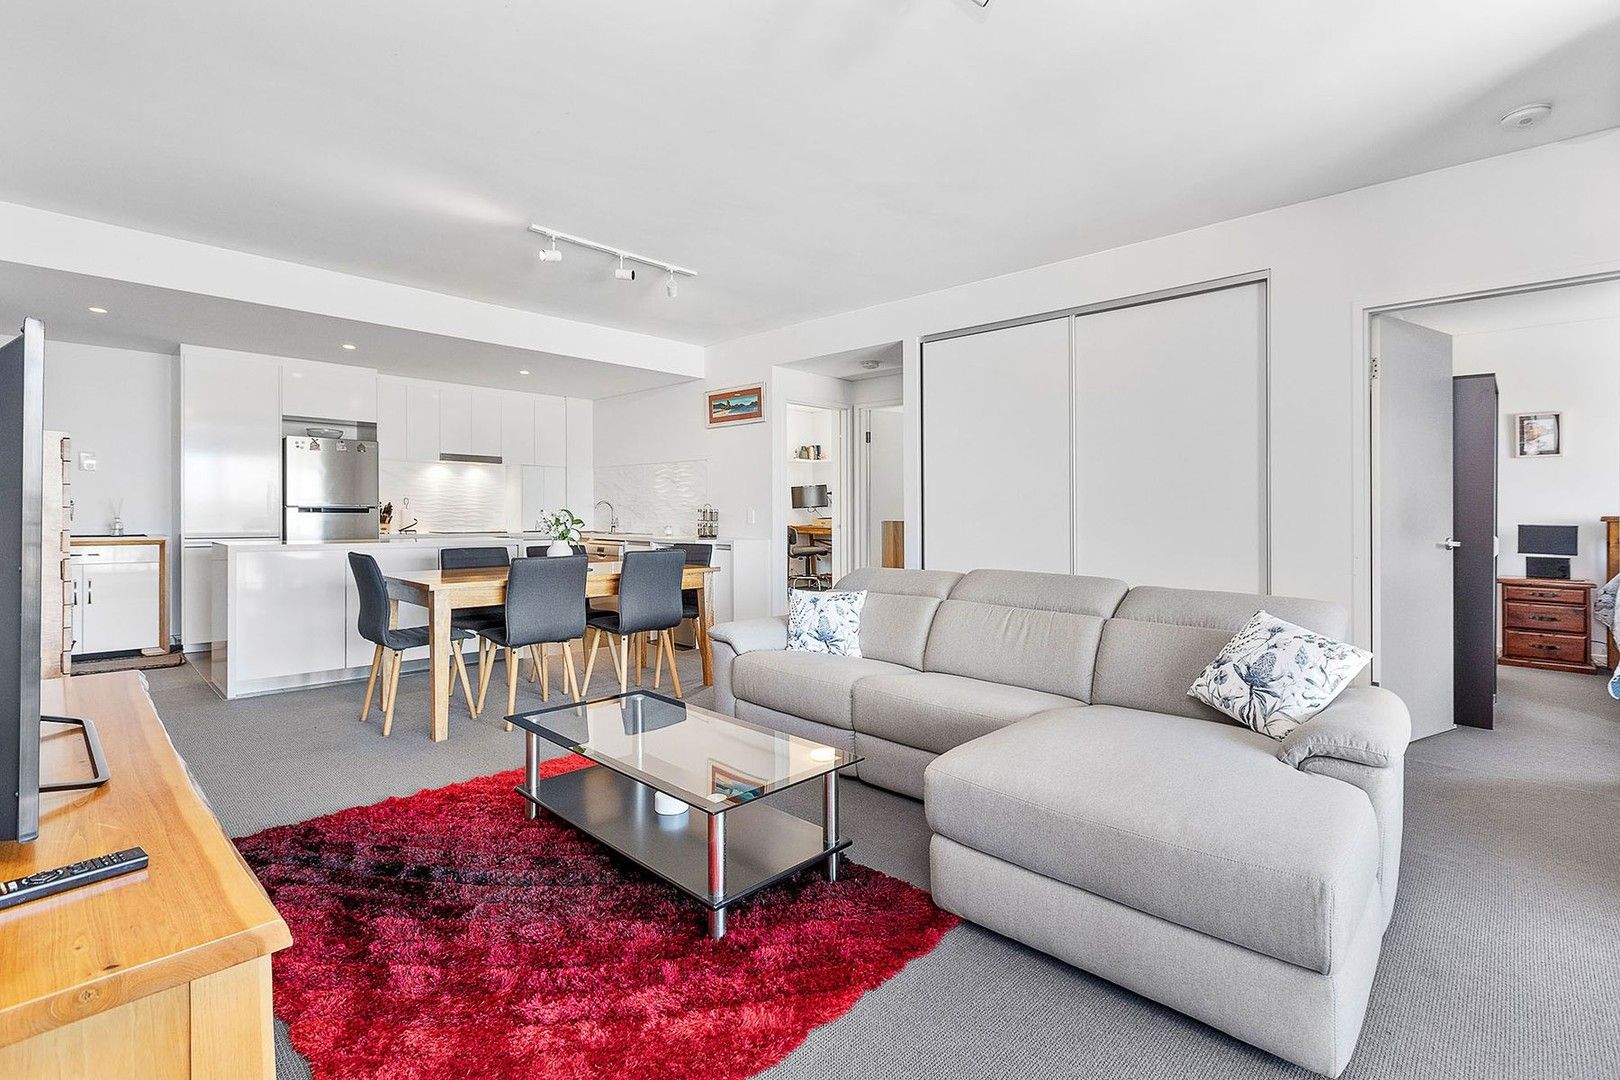 2 bedrooms Apartment / Unit / Flat in 28/36 Bronte Street EAST PERTH WA, 6004